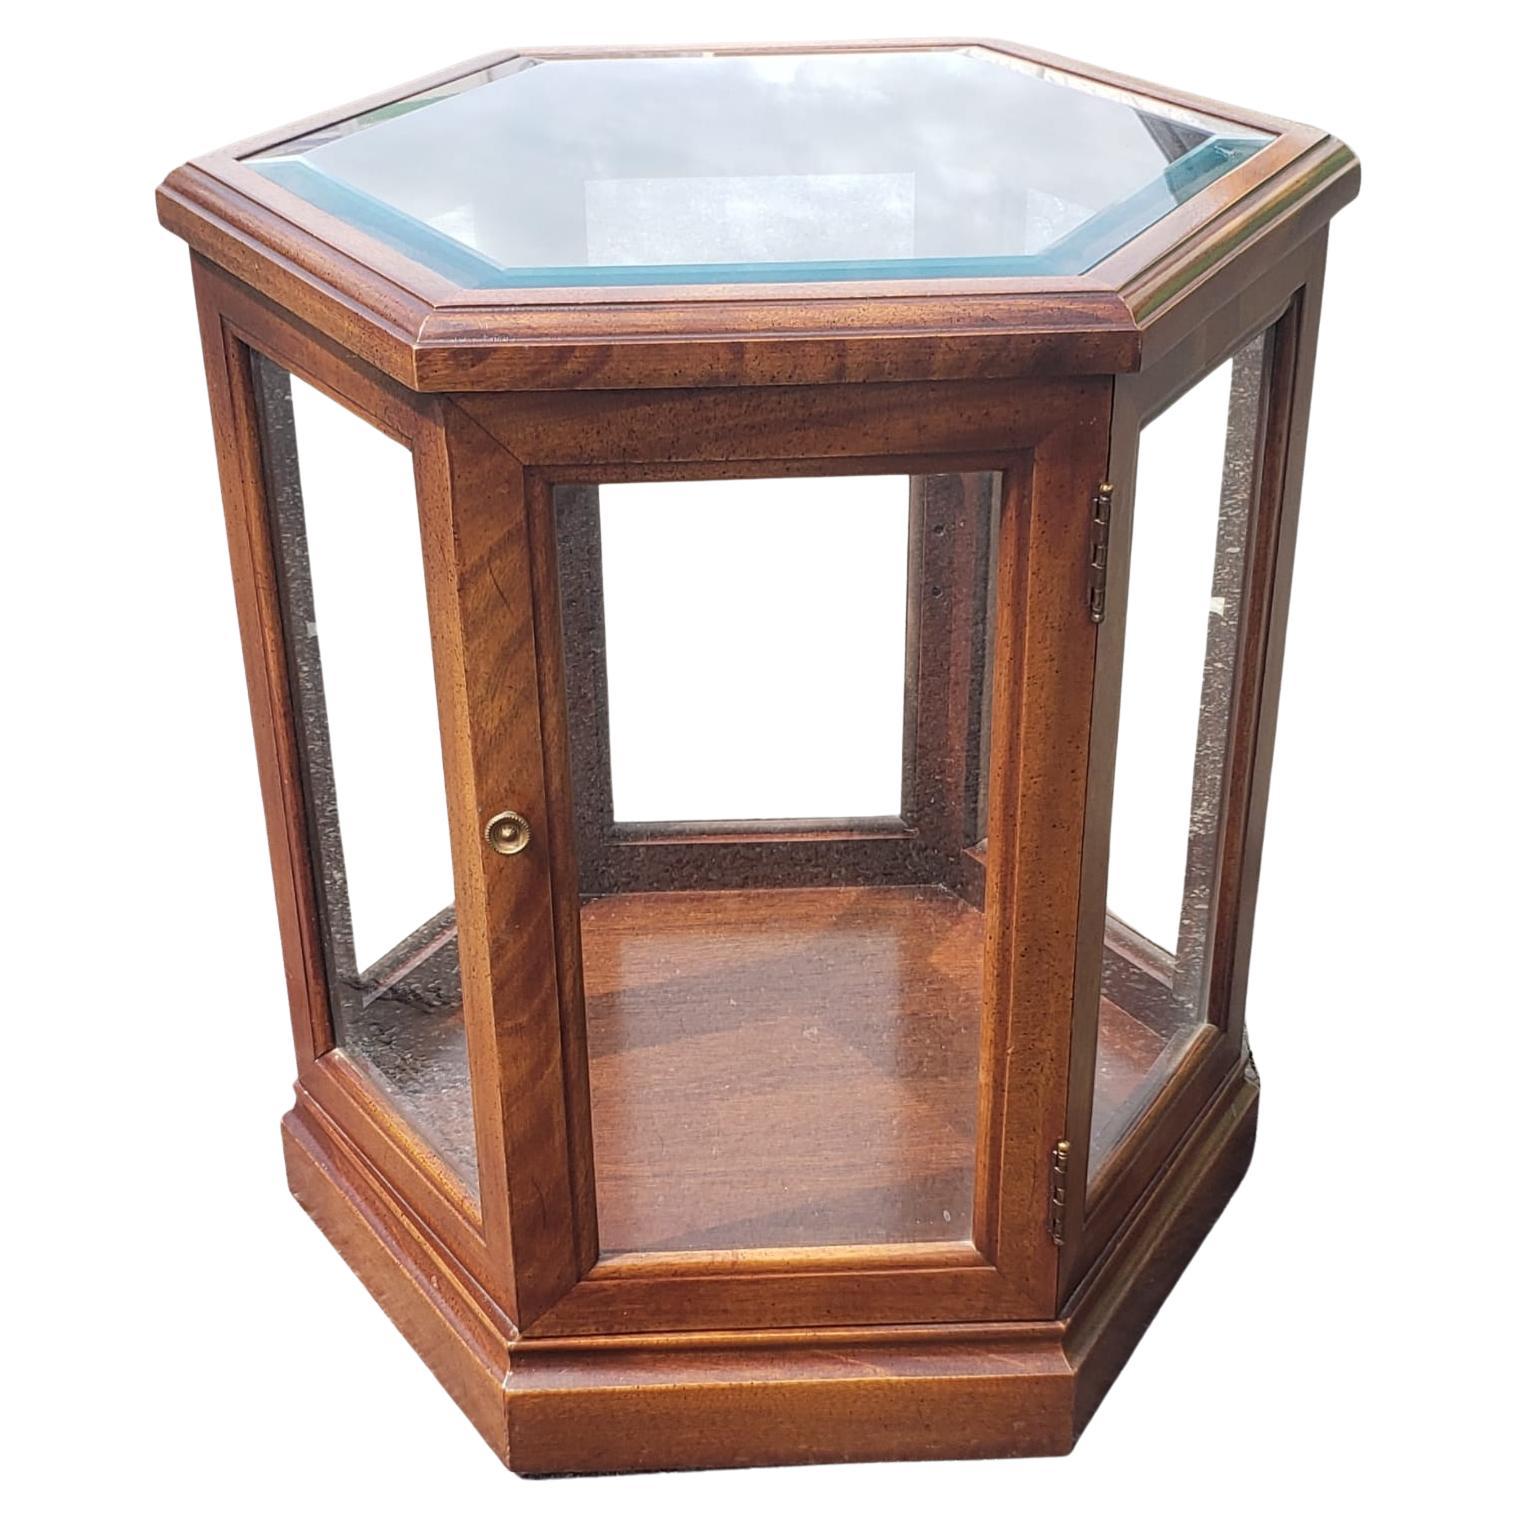 A Vintage Fruitwood and Glass Paneled Hexagonal Side Table in great vintage consdition.  Measures 21.5